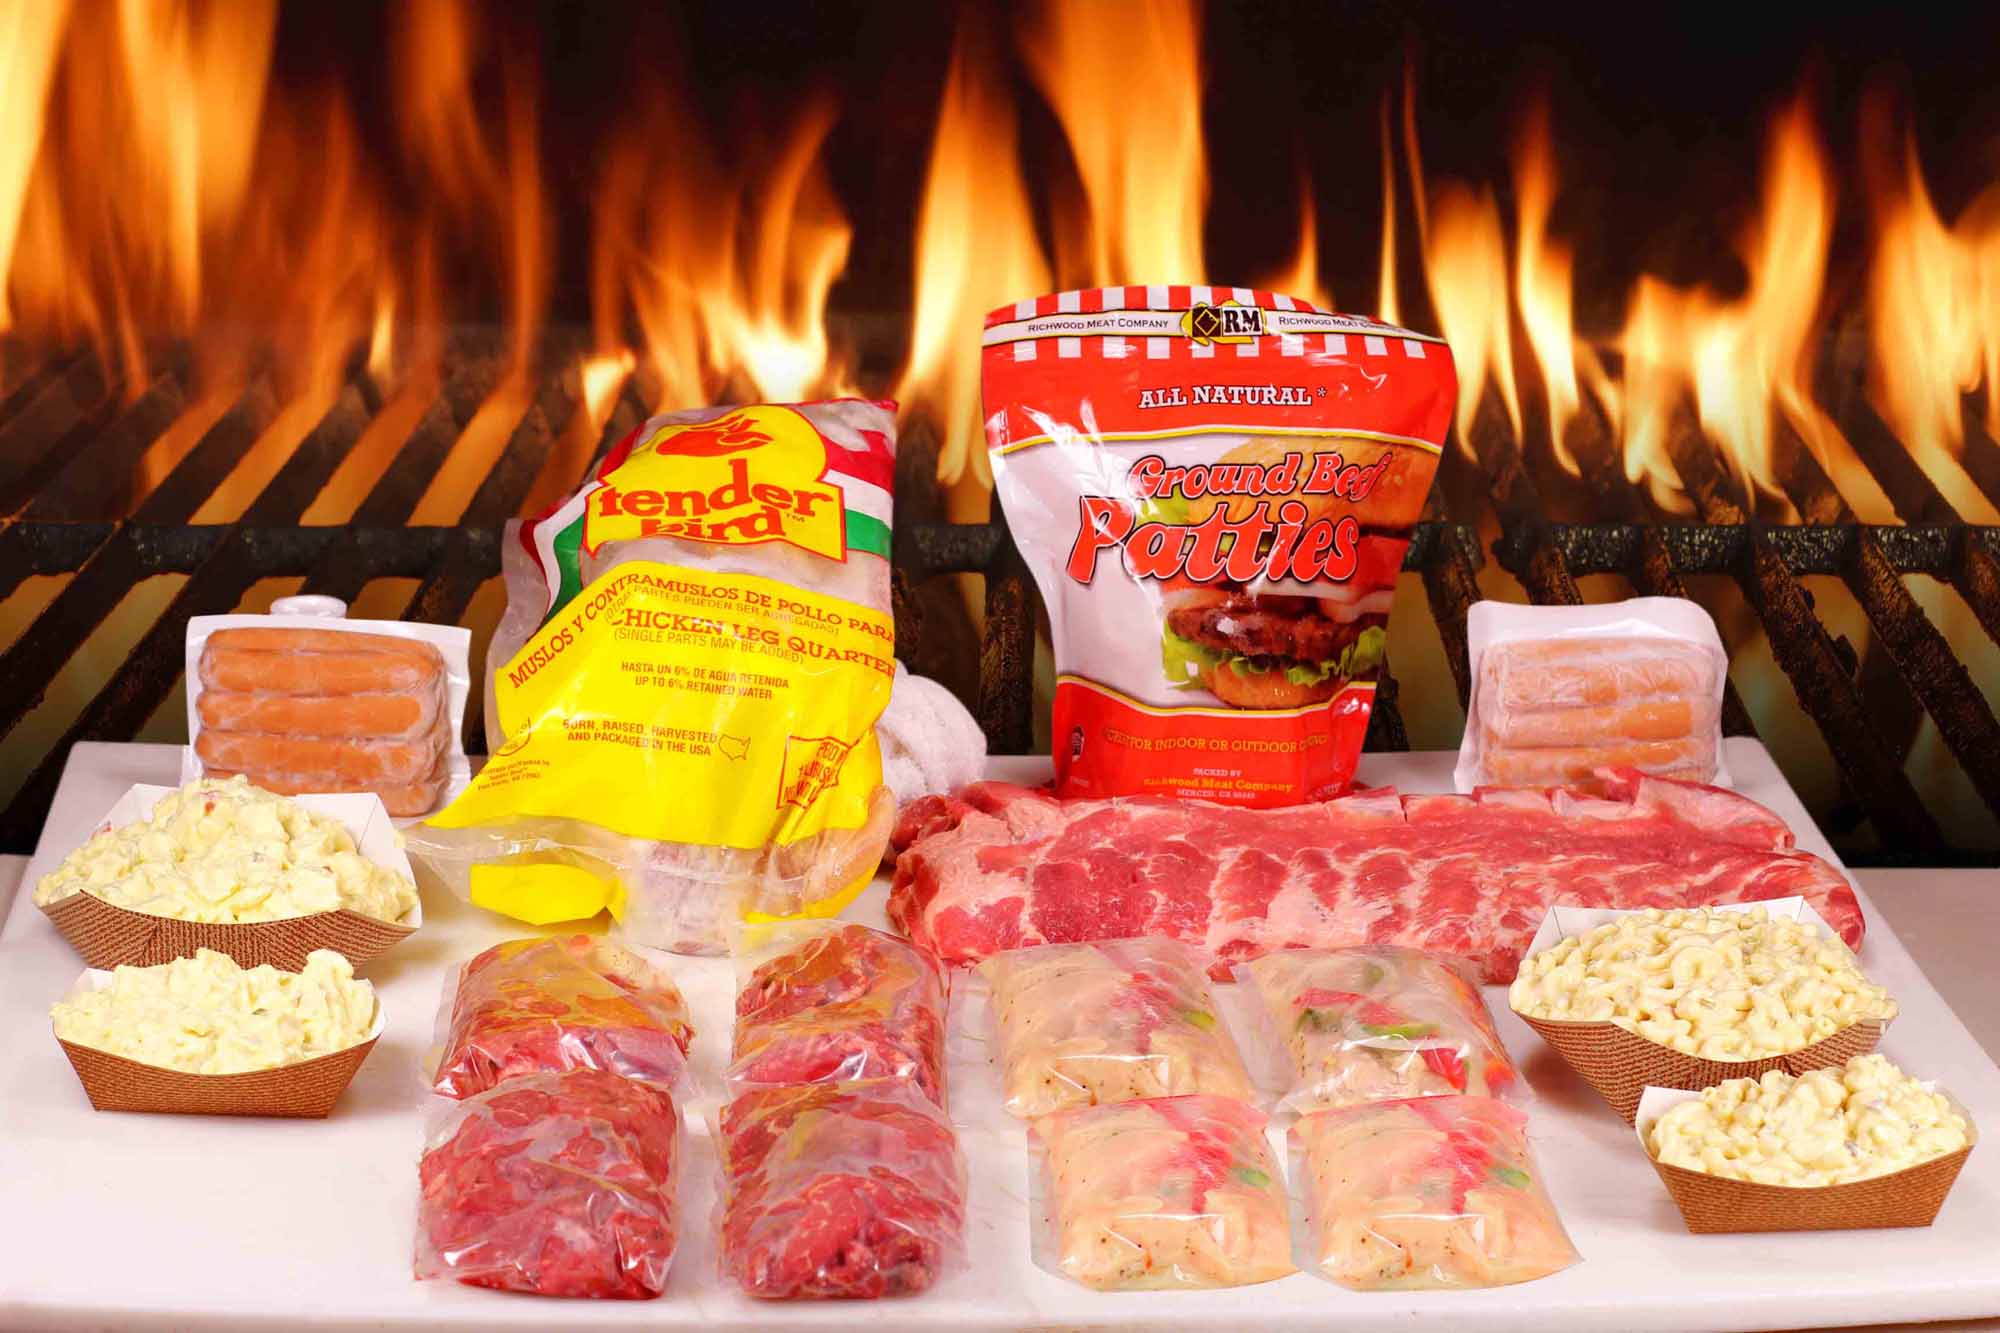 This image icon displays the Purdy's Quality Meats Summmer BBQ Pack 2 image